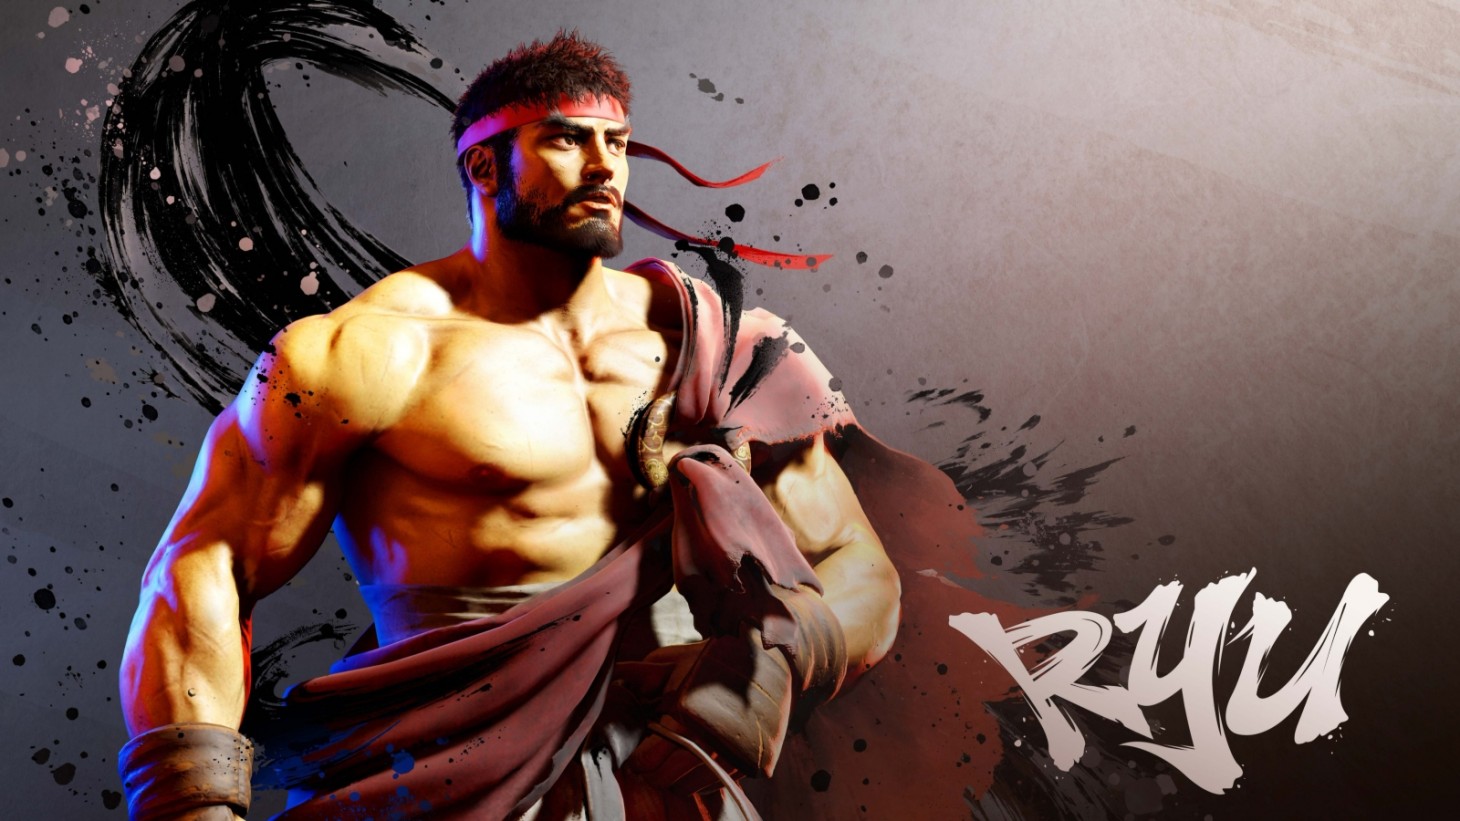 What exactly is Akuma becoming in Street Fighter 6? 